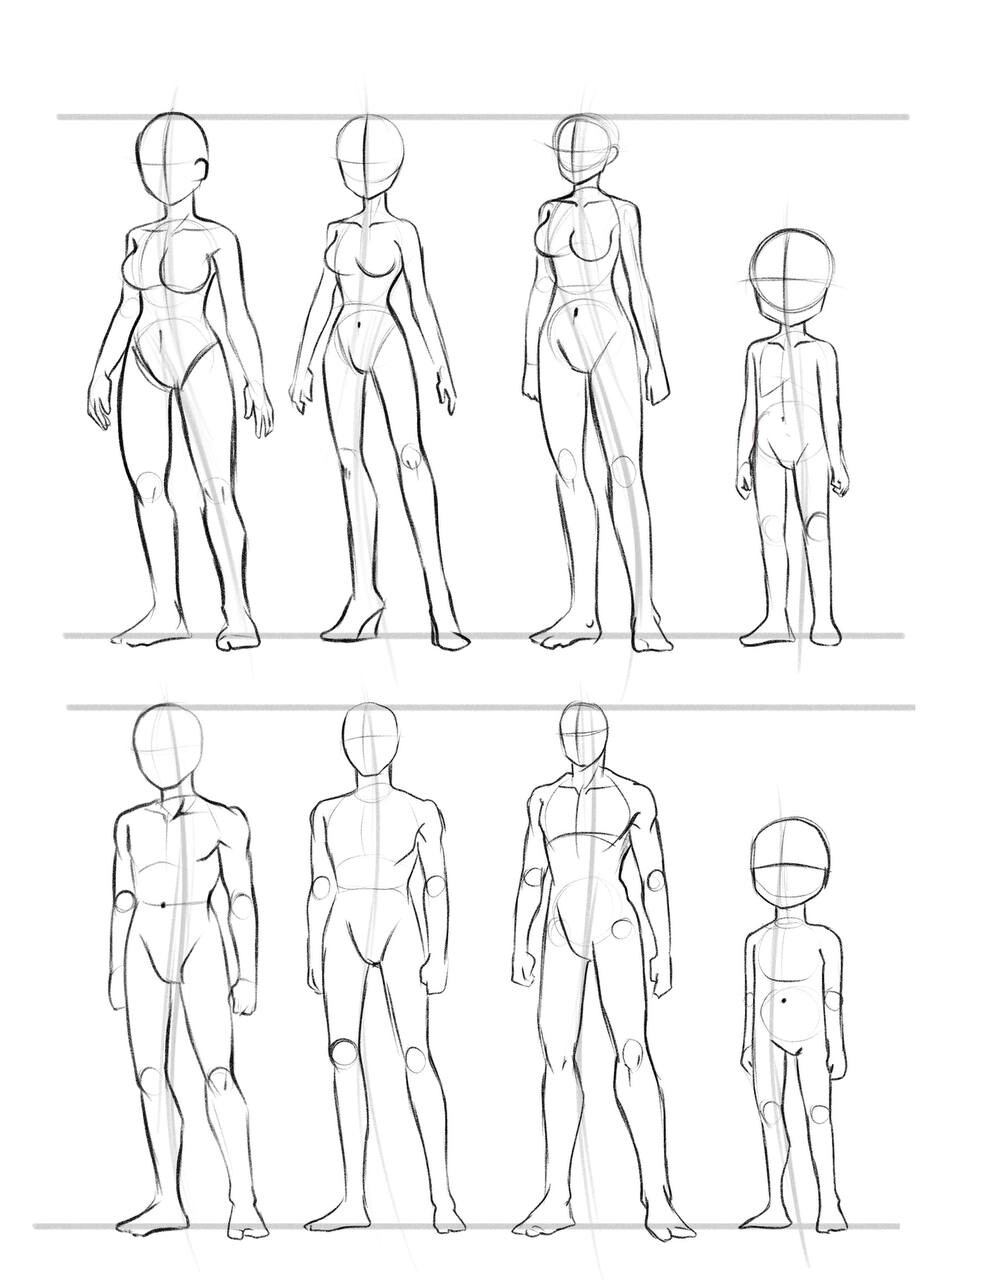 How to draw Anime Body and poses (Tutorial) From Basic Anatomy || Easy Anime  sketch | - YouTube